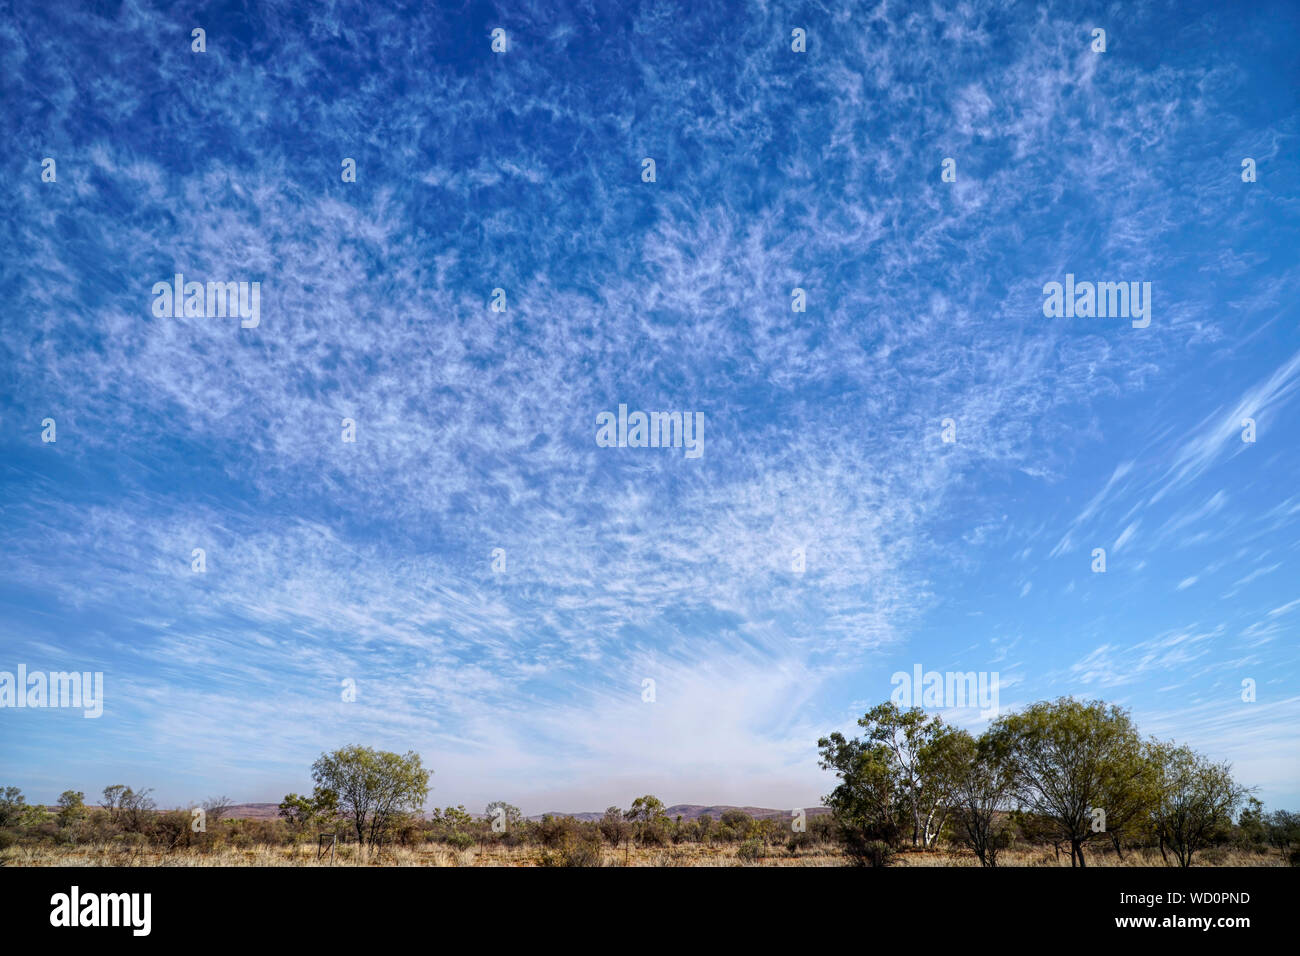 Dry arid landscape in Northern Australia on a windy day with dust clouds in the background Stock Photo